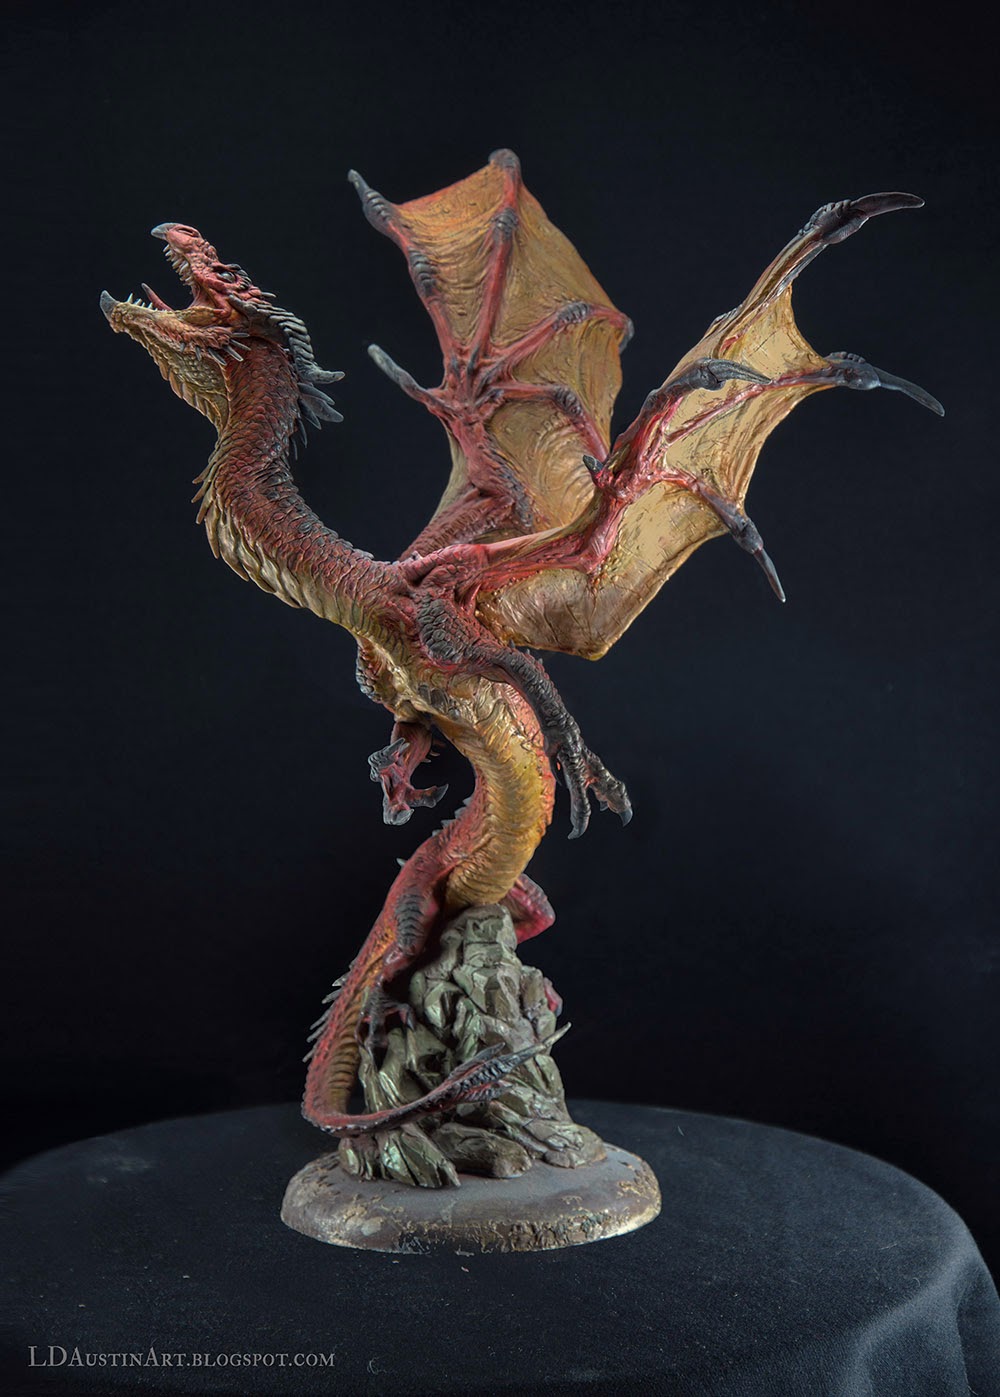 The Art of LD Austin: Smaug - Out of the Shire